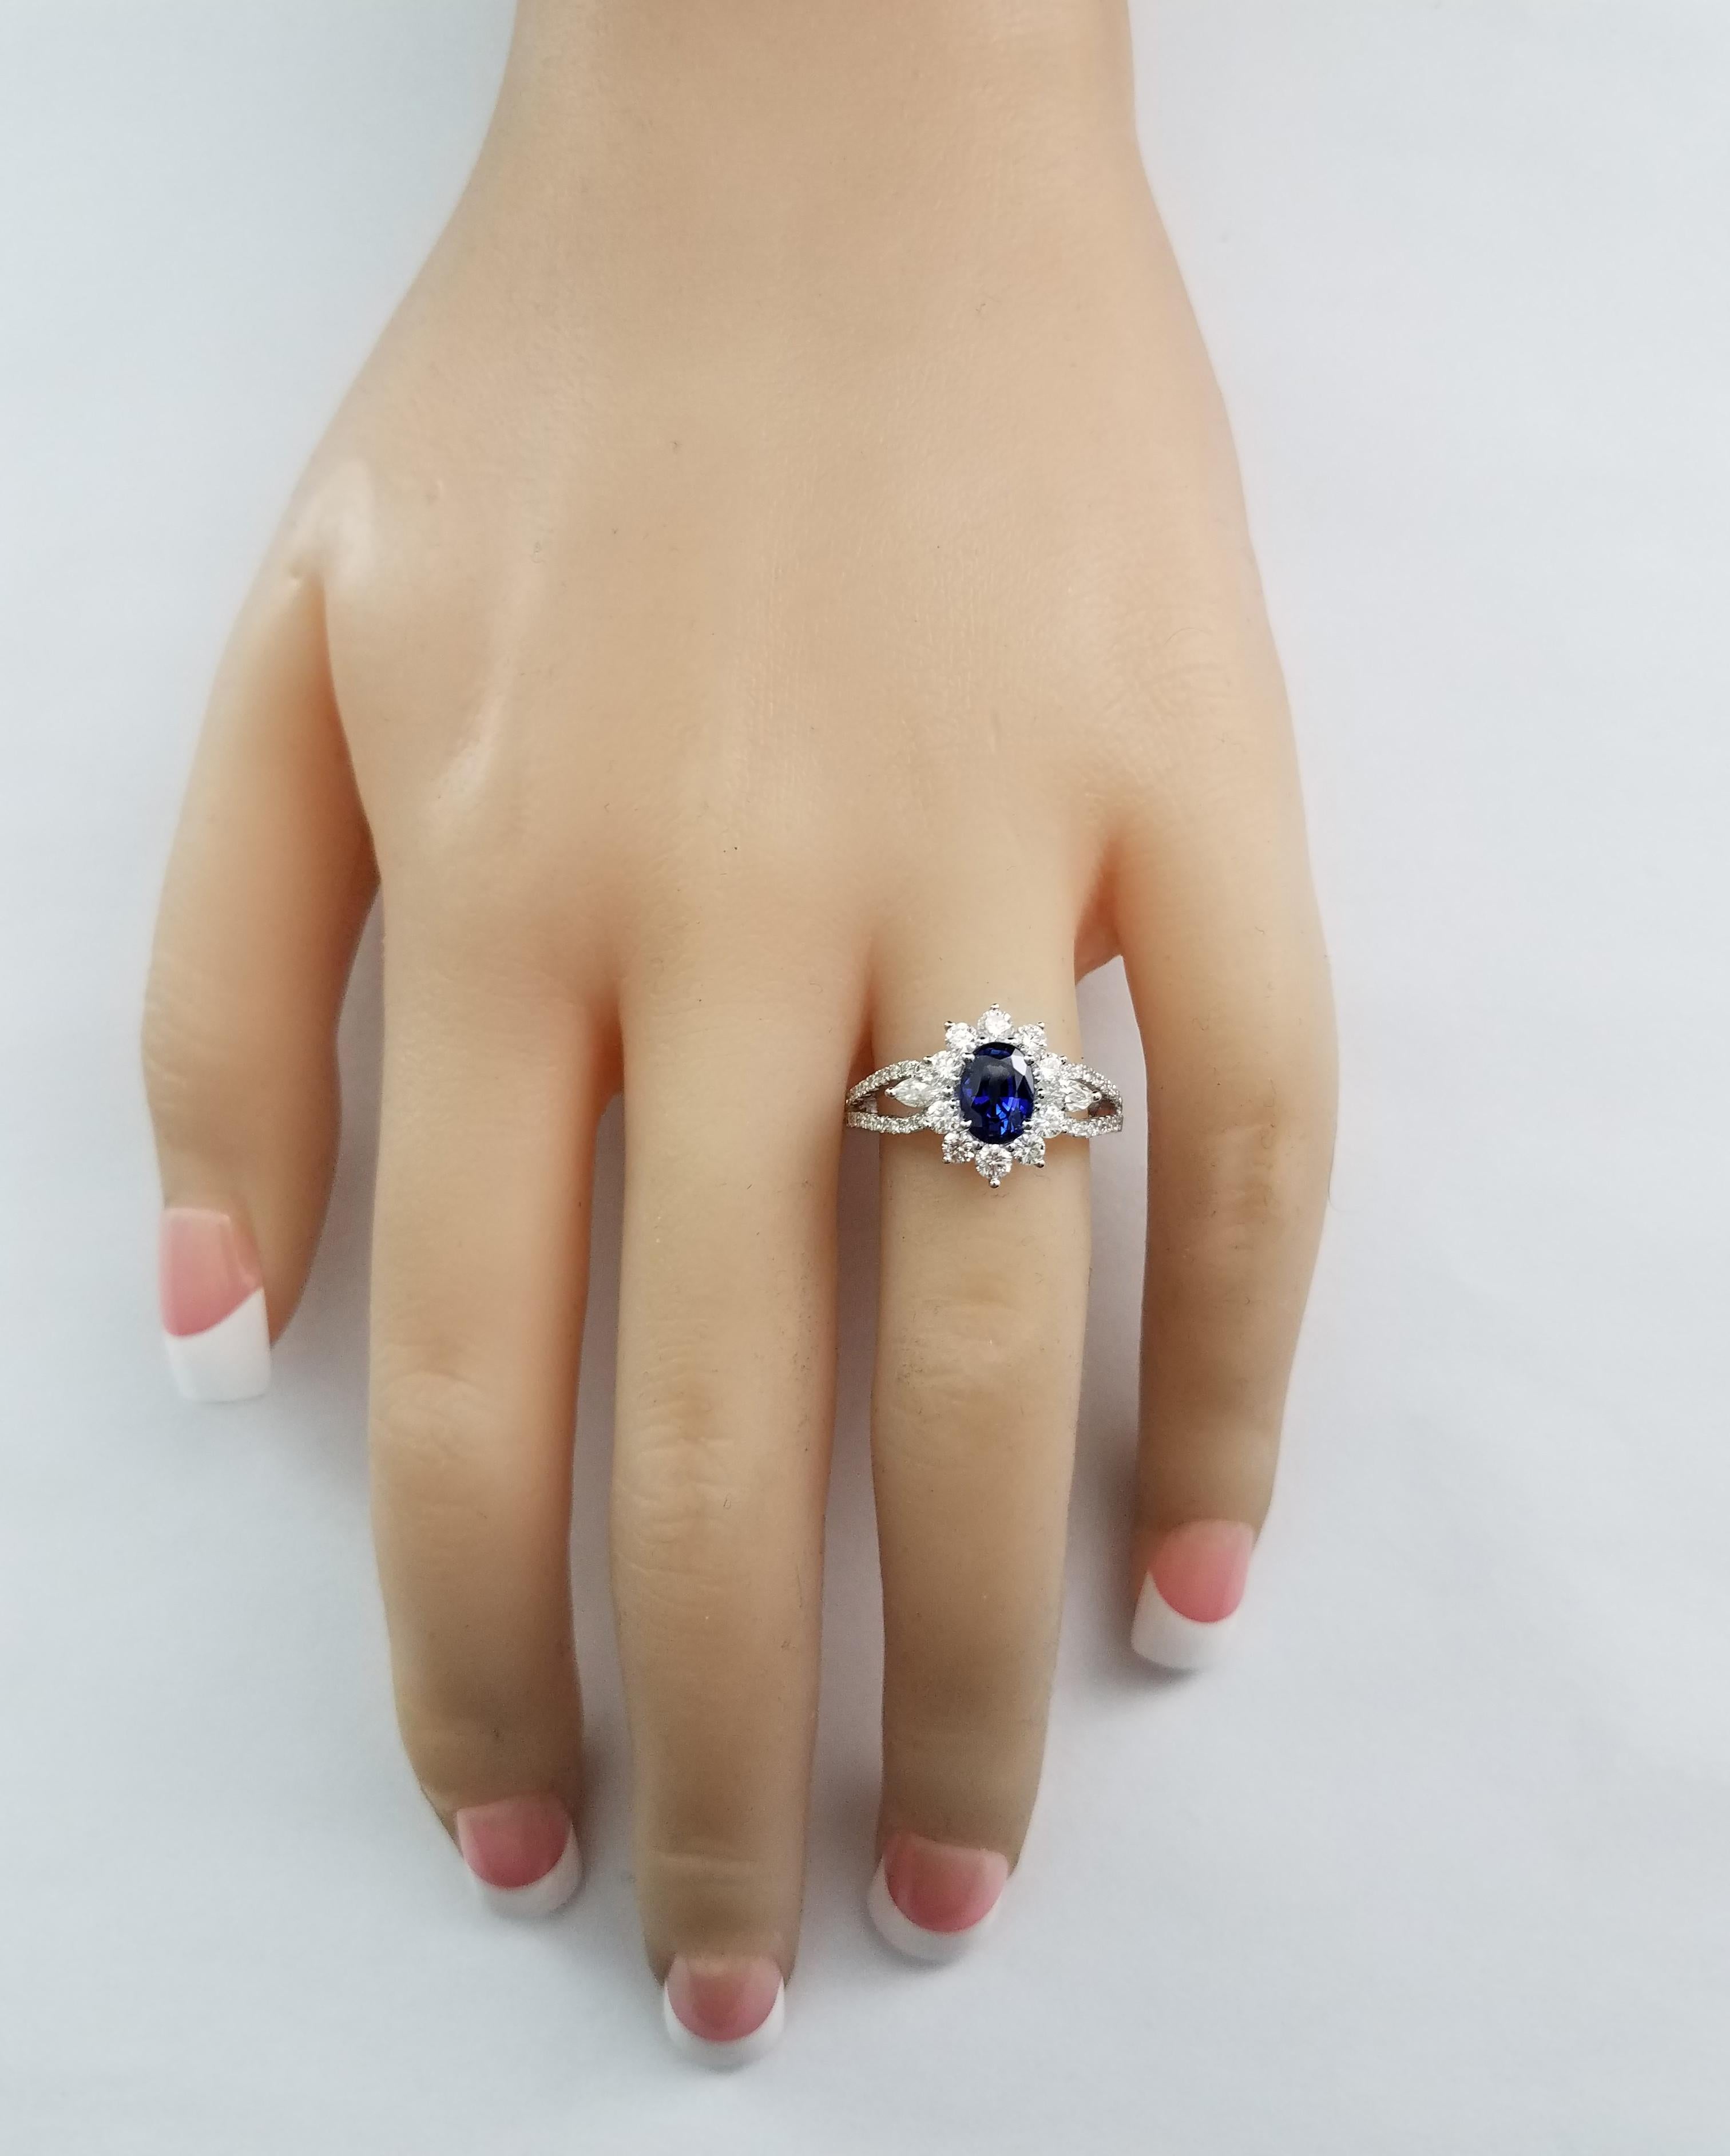 This elegant and vibrant engagement ring featuring 1.23 carat oval cut blue sapphire in the center, surrounded by 2 pieces of marquise cut diamonds and 50 pieces of brilliant round cut diamonds weighing 0.85 carat total, set in a split shank